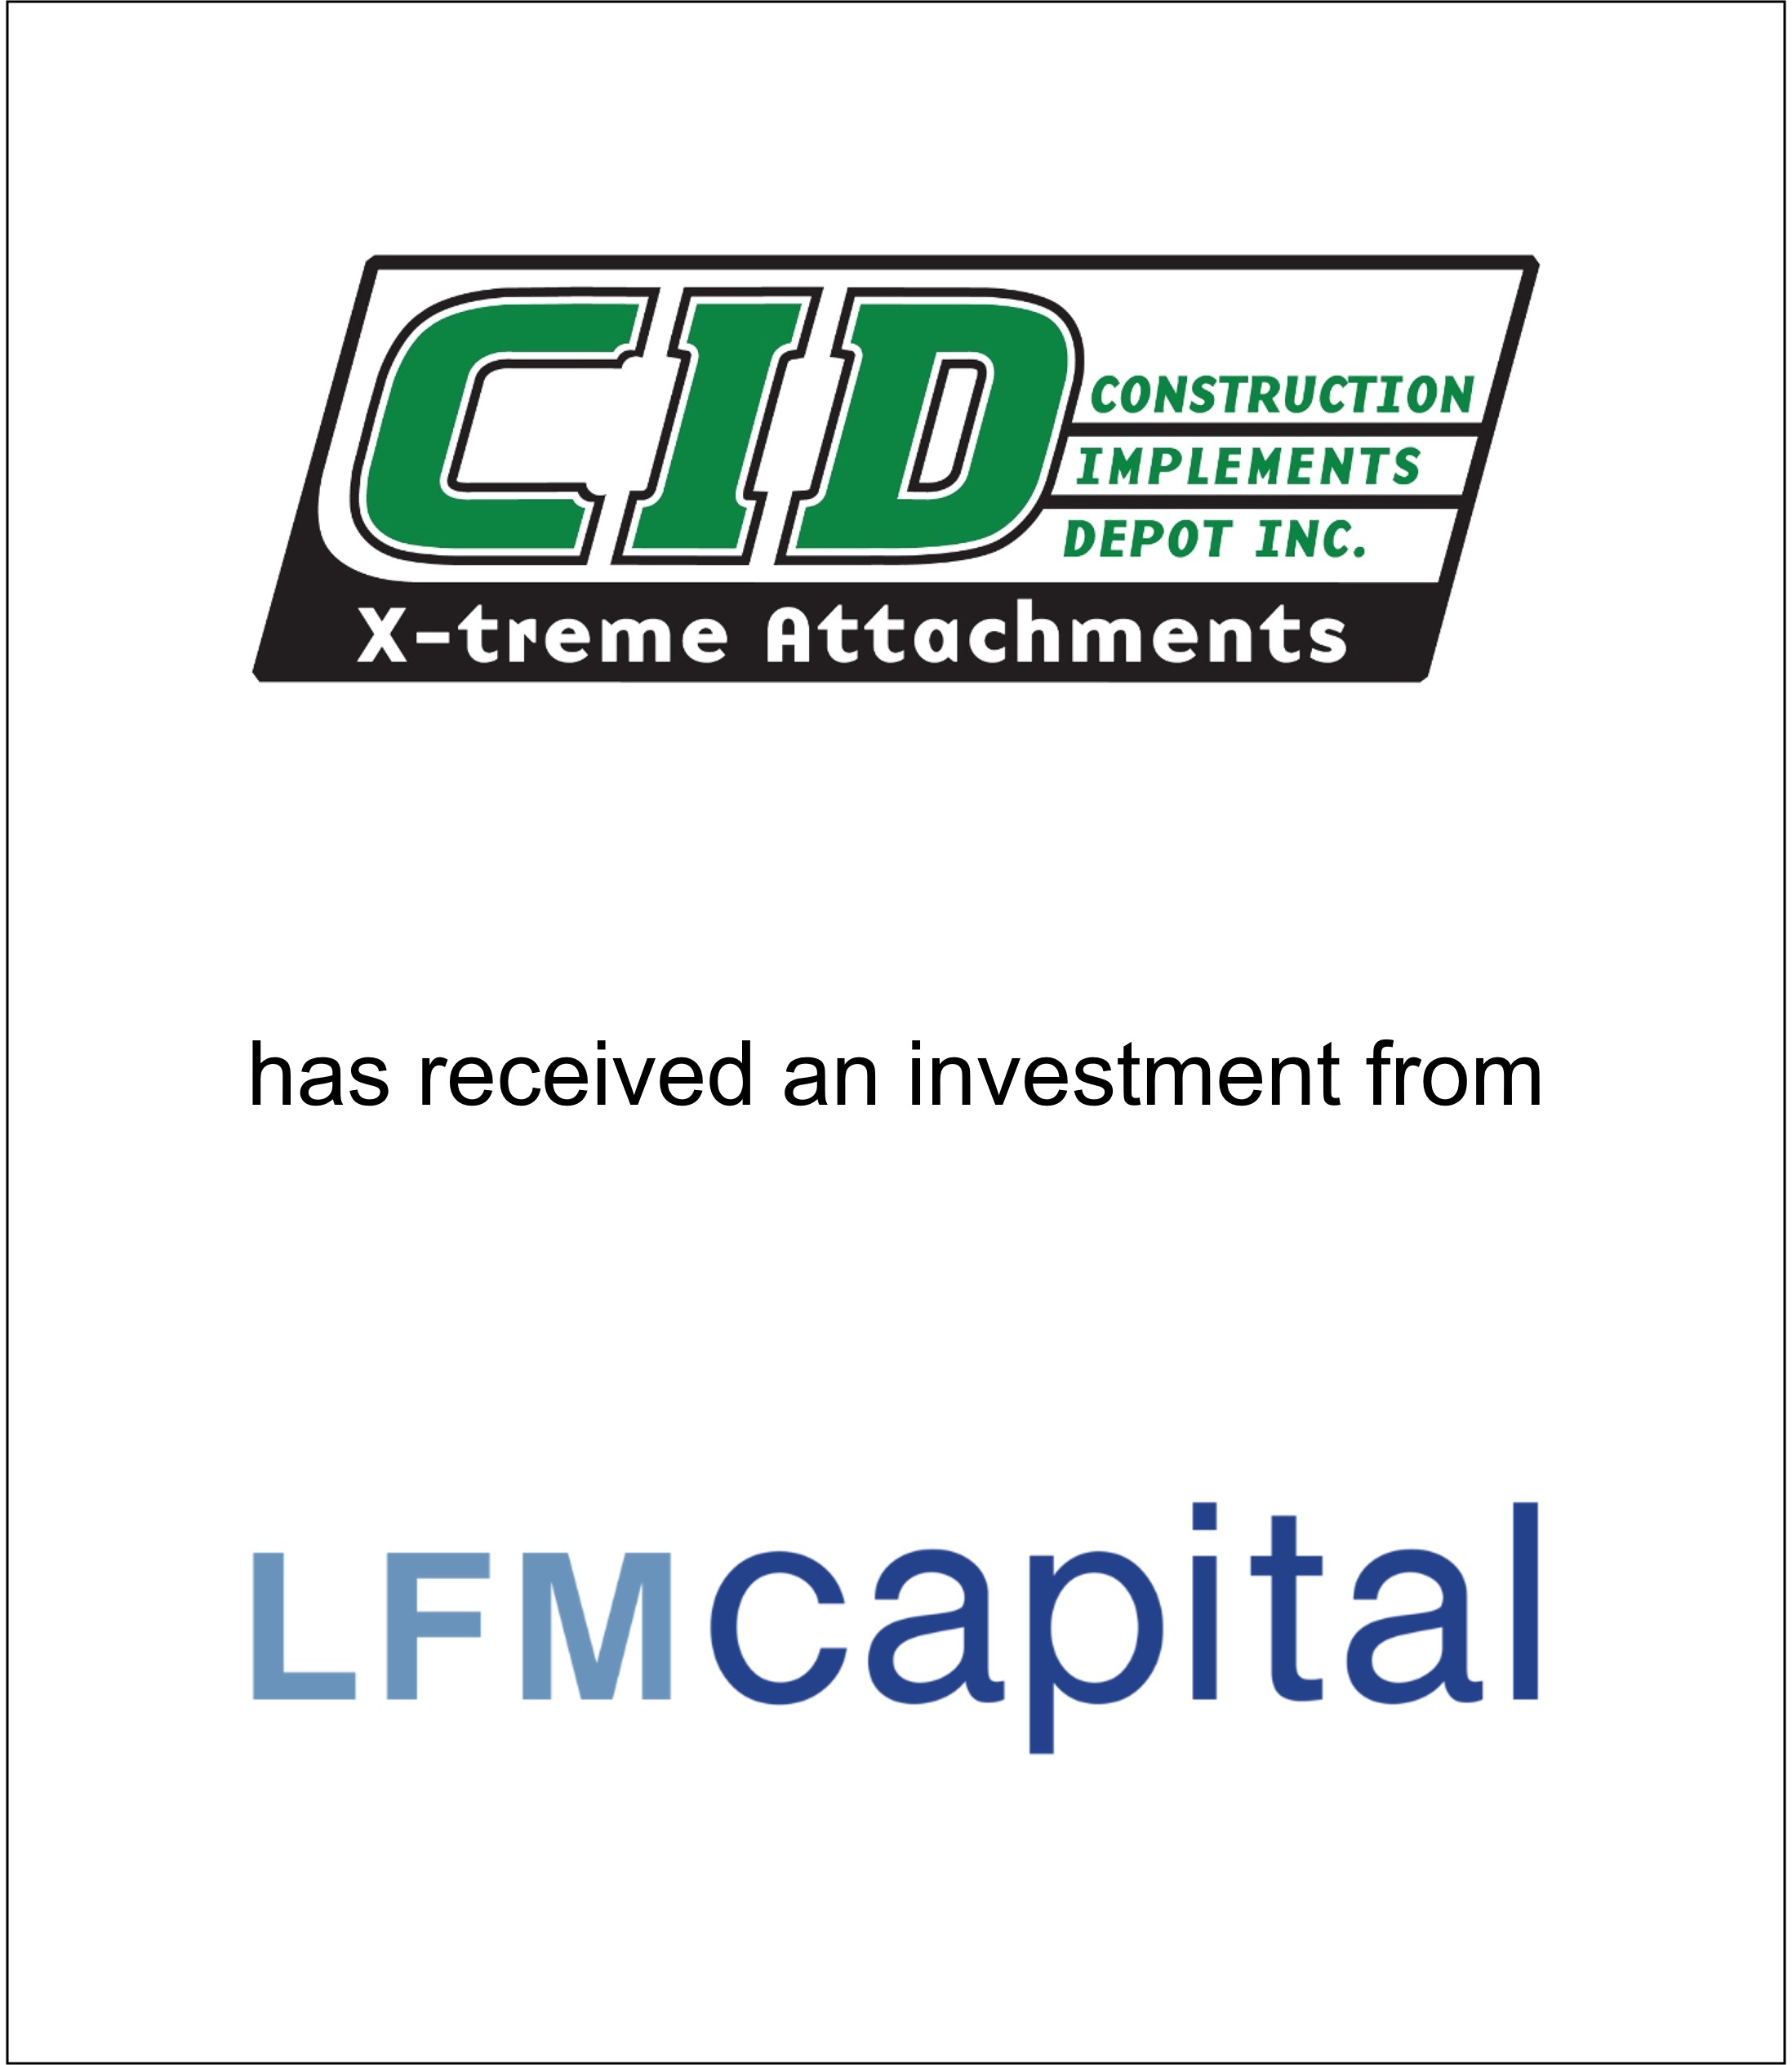 Genesis Capital Advises Construction Implements Depot on its Investment from LFM Capital